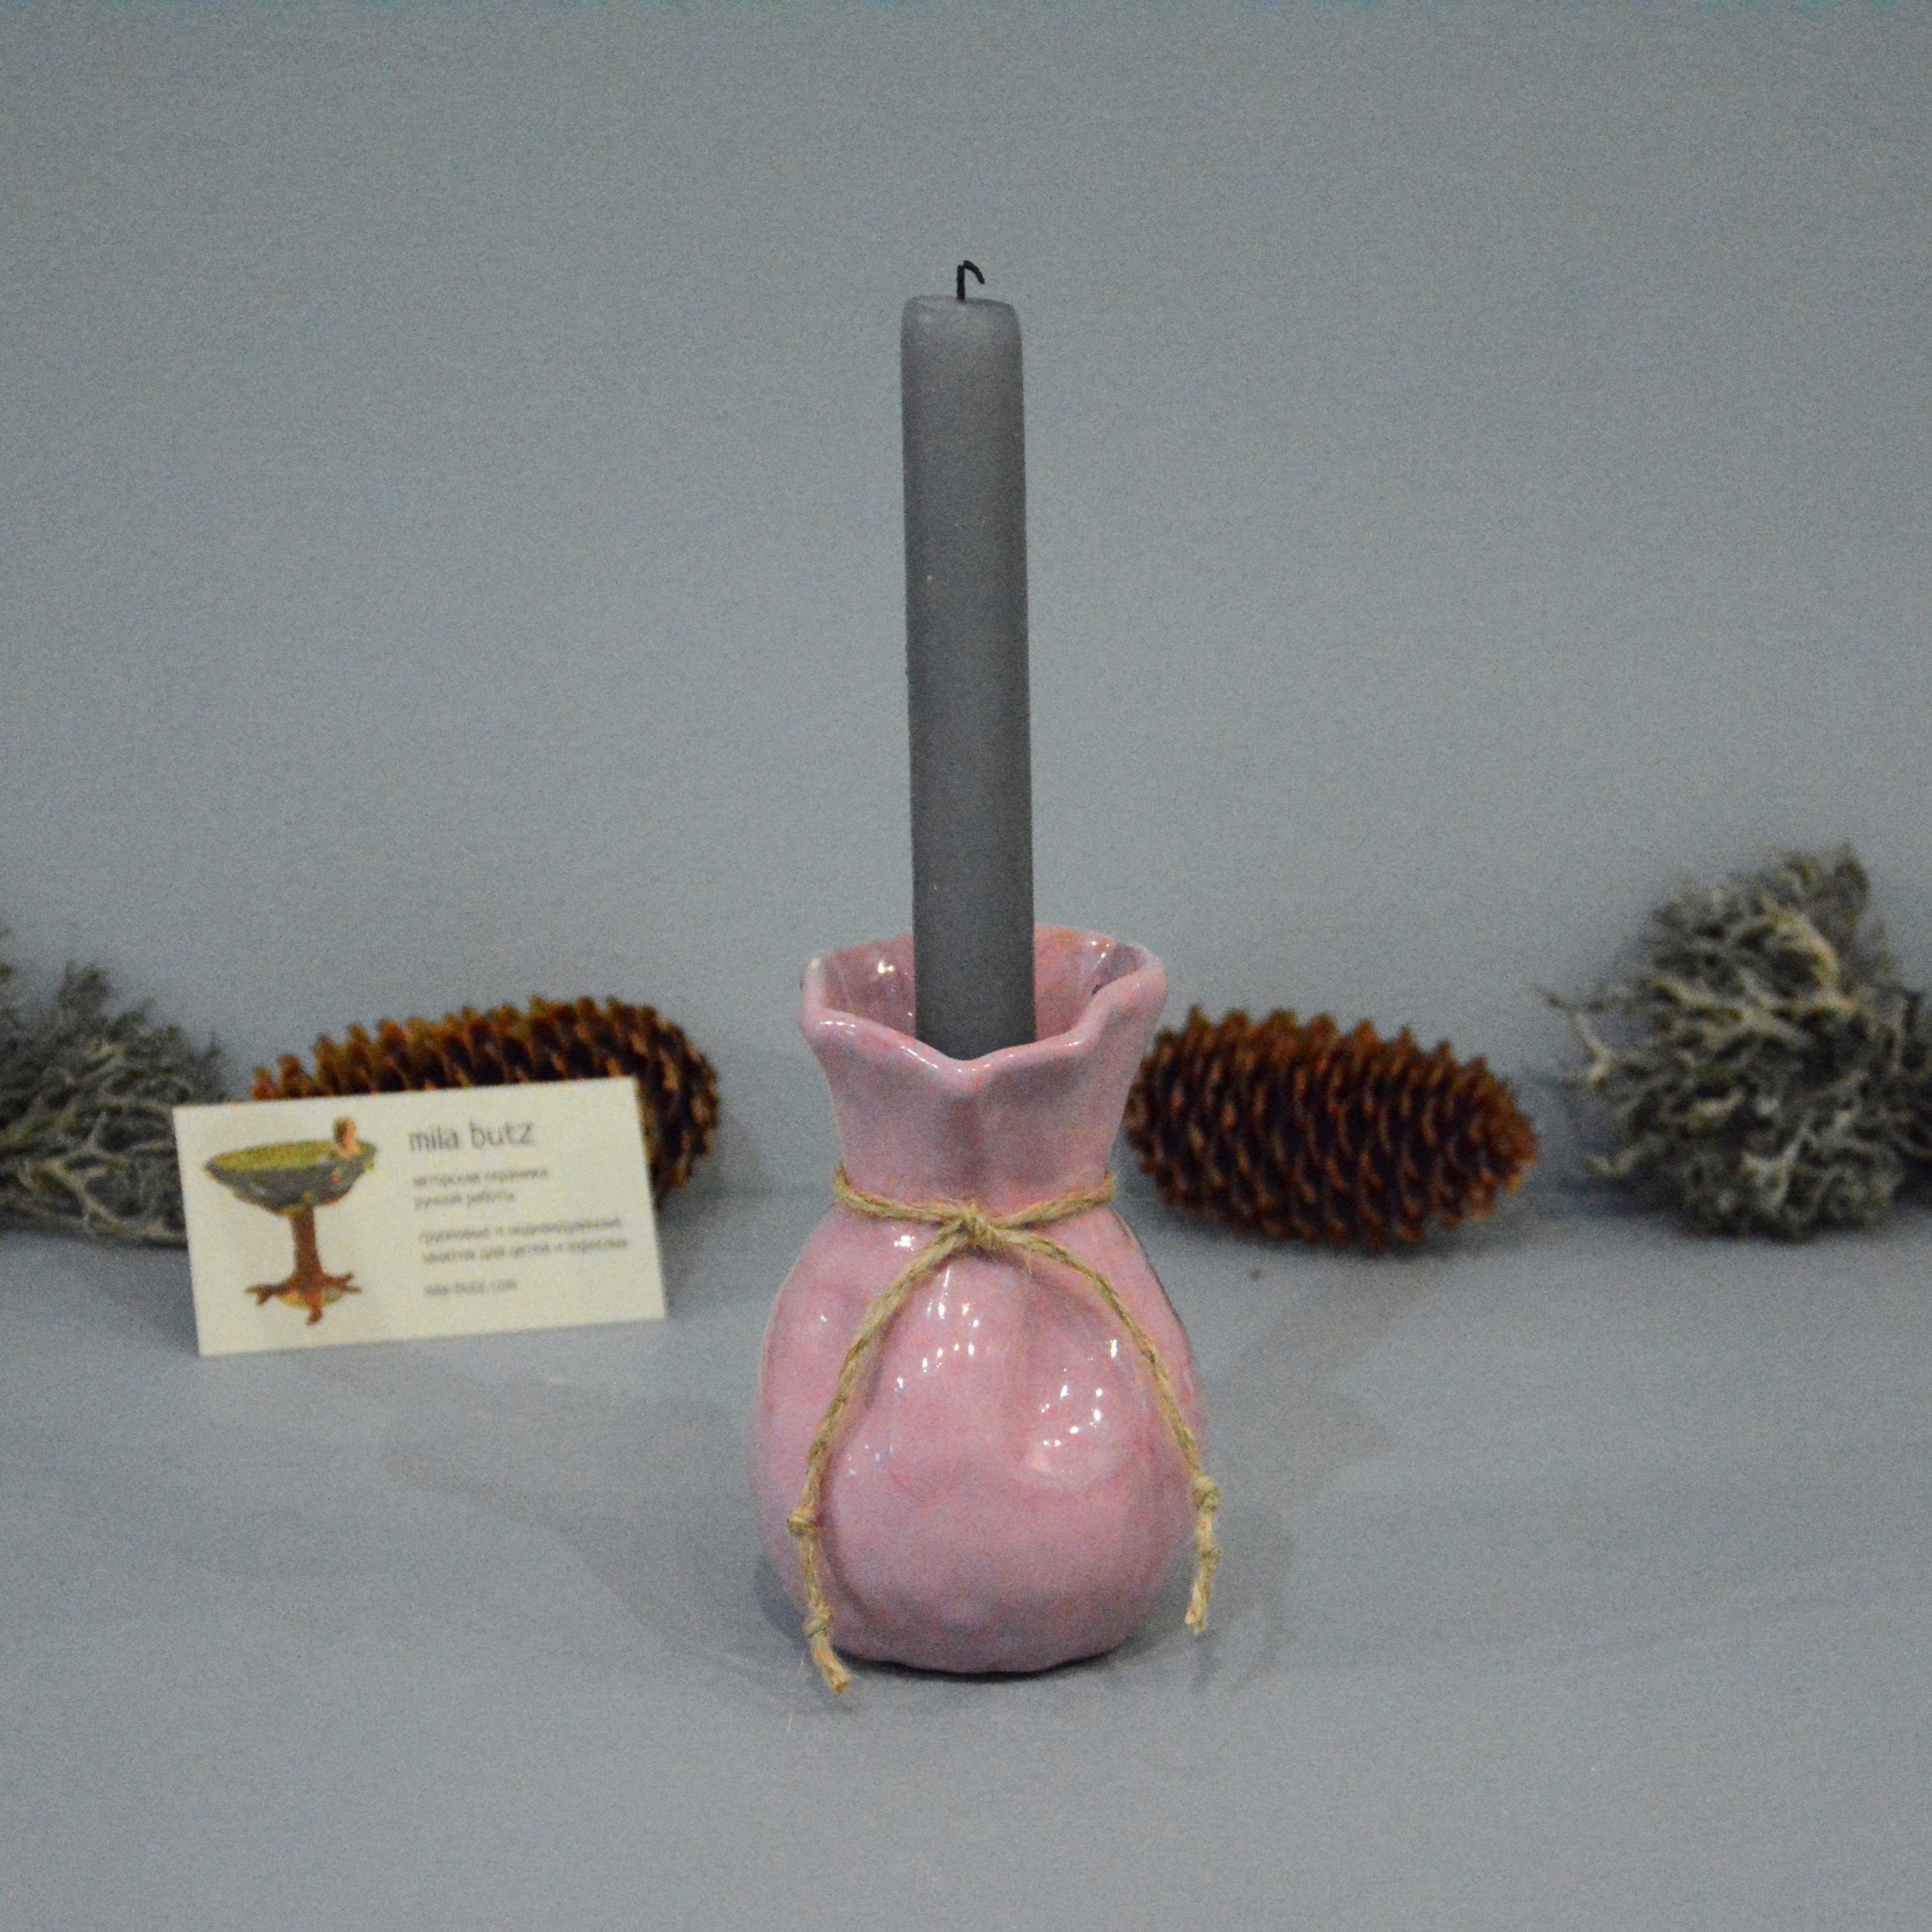 Candle vase «Pink Bagful», height - 11 cm. Photo 1293-3840-3840.